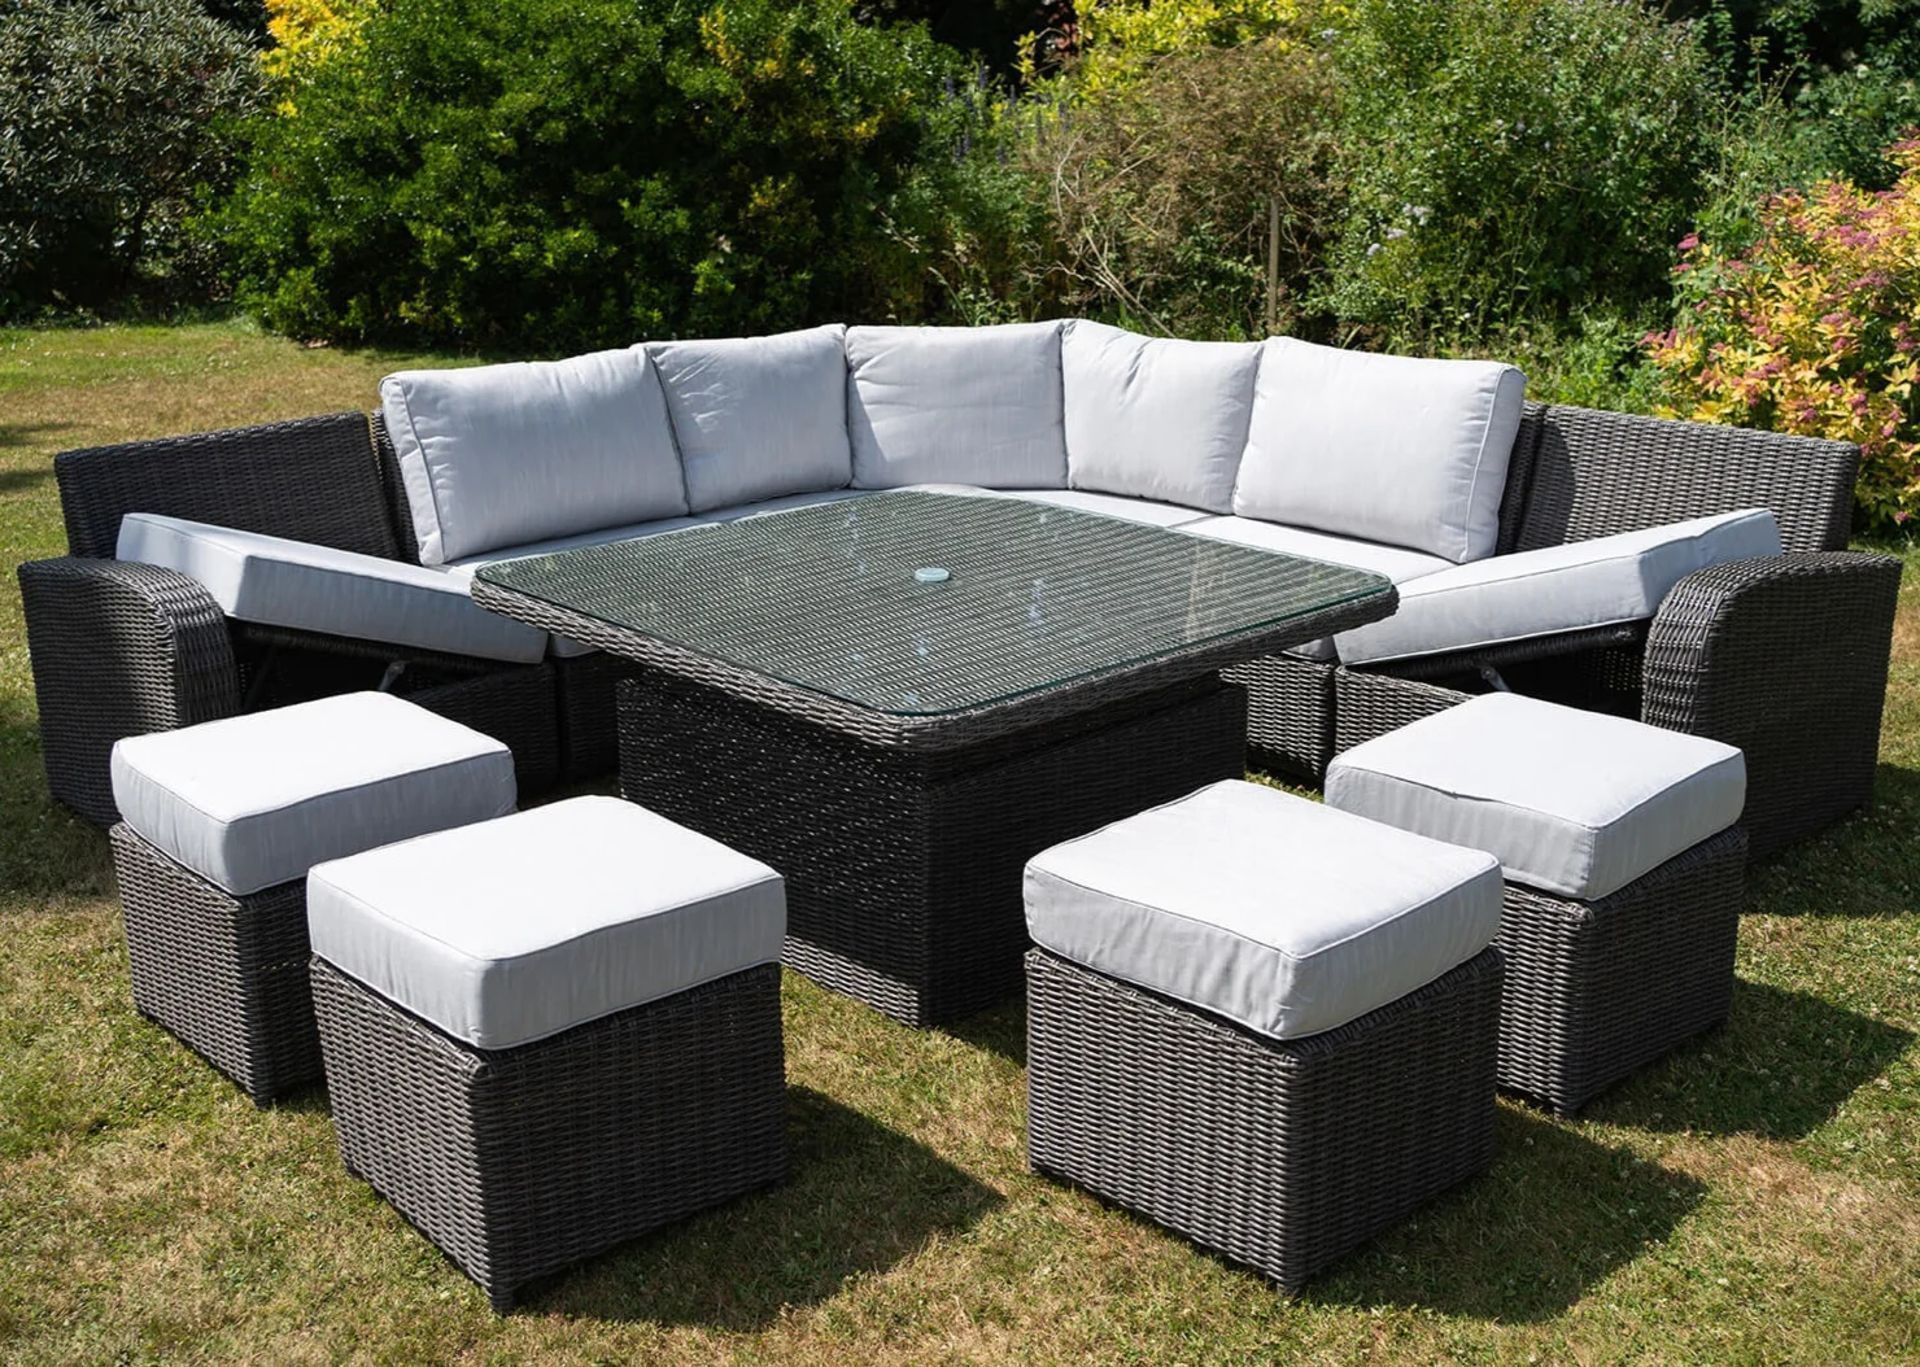 Brand New Moda Furniture, 10 Seater Outdoor Rise and Fall Table Dining Set in Grey with Grey - Image 2 of 9